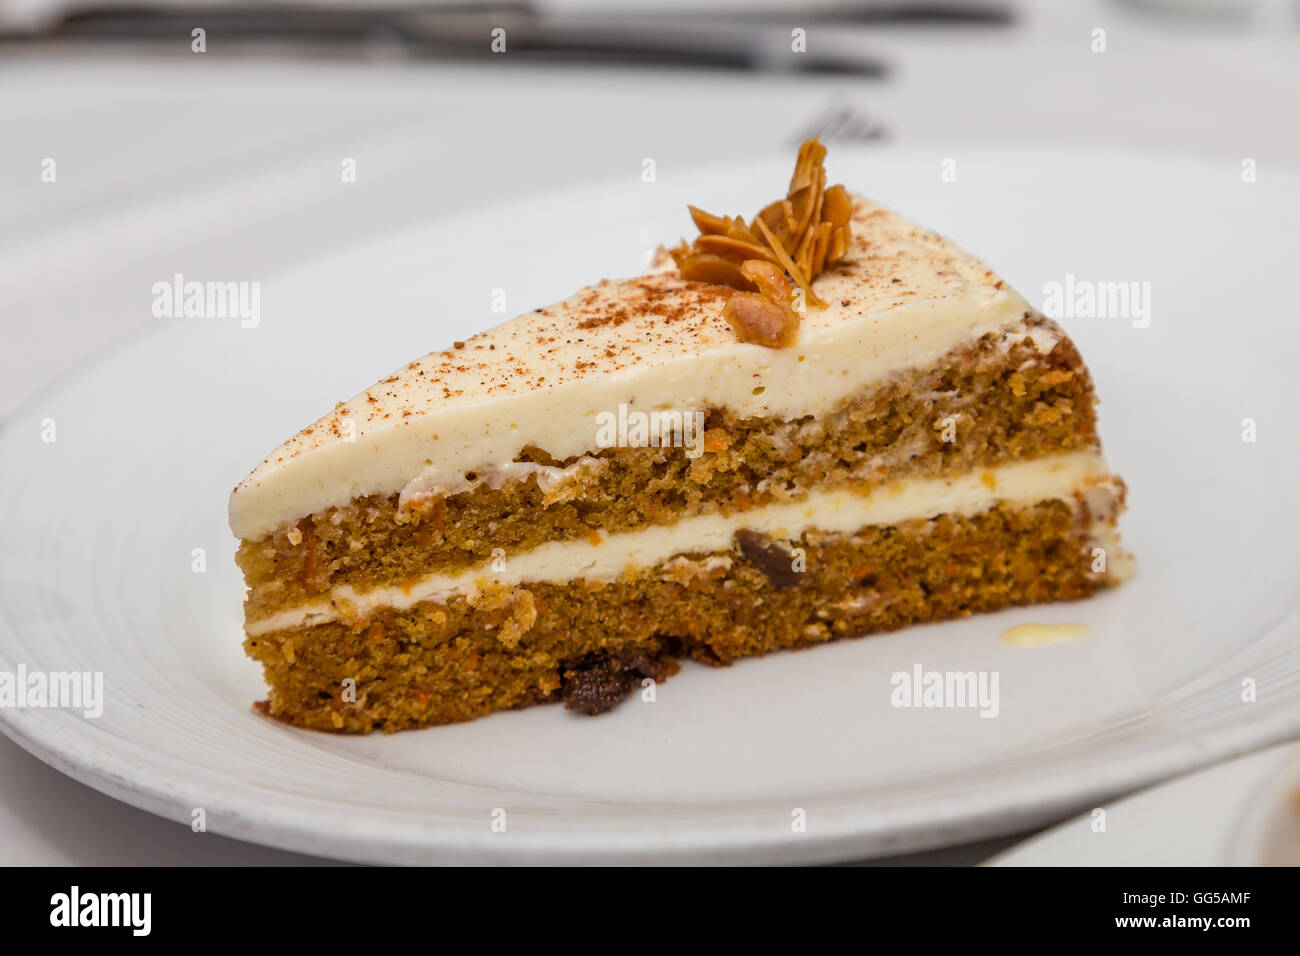 A slice of fresh carrot cake on a plate Stock Photo